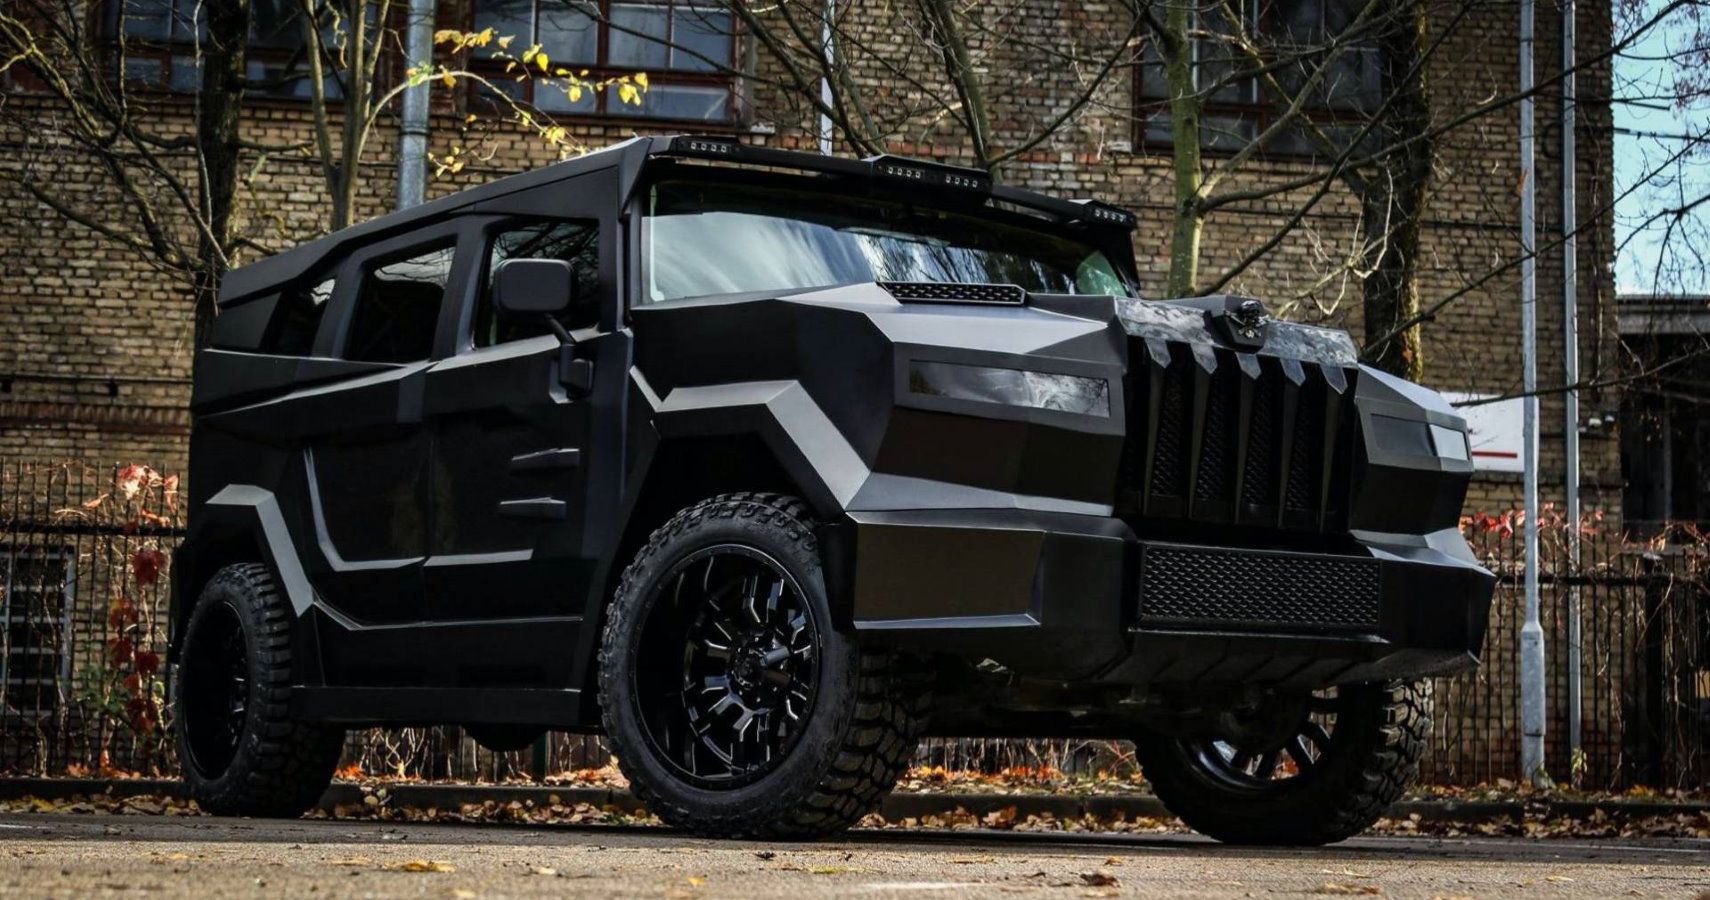 This Modernized H2 Hummer Is The Kevlar-Coated Armored SUV For Today’s Supervillain